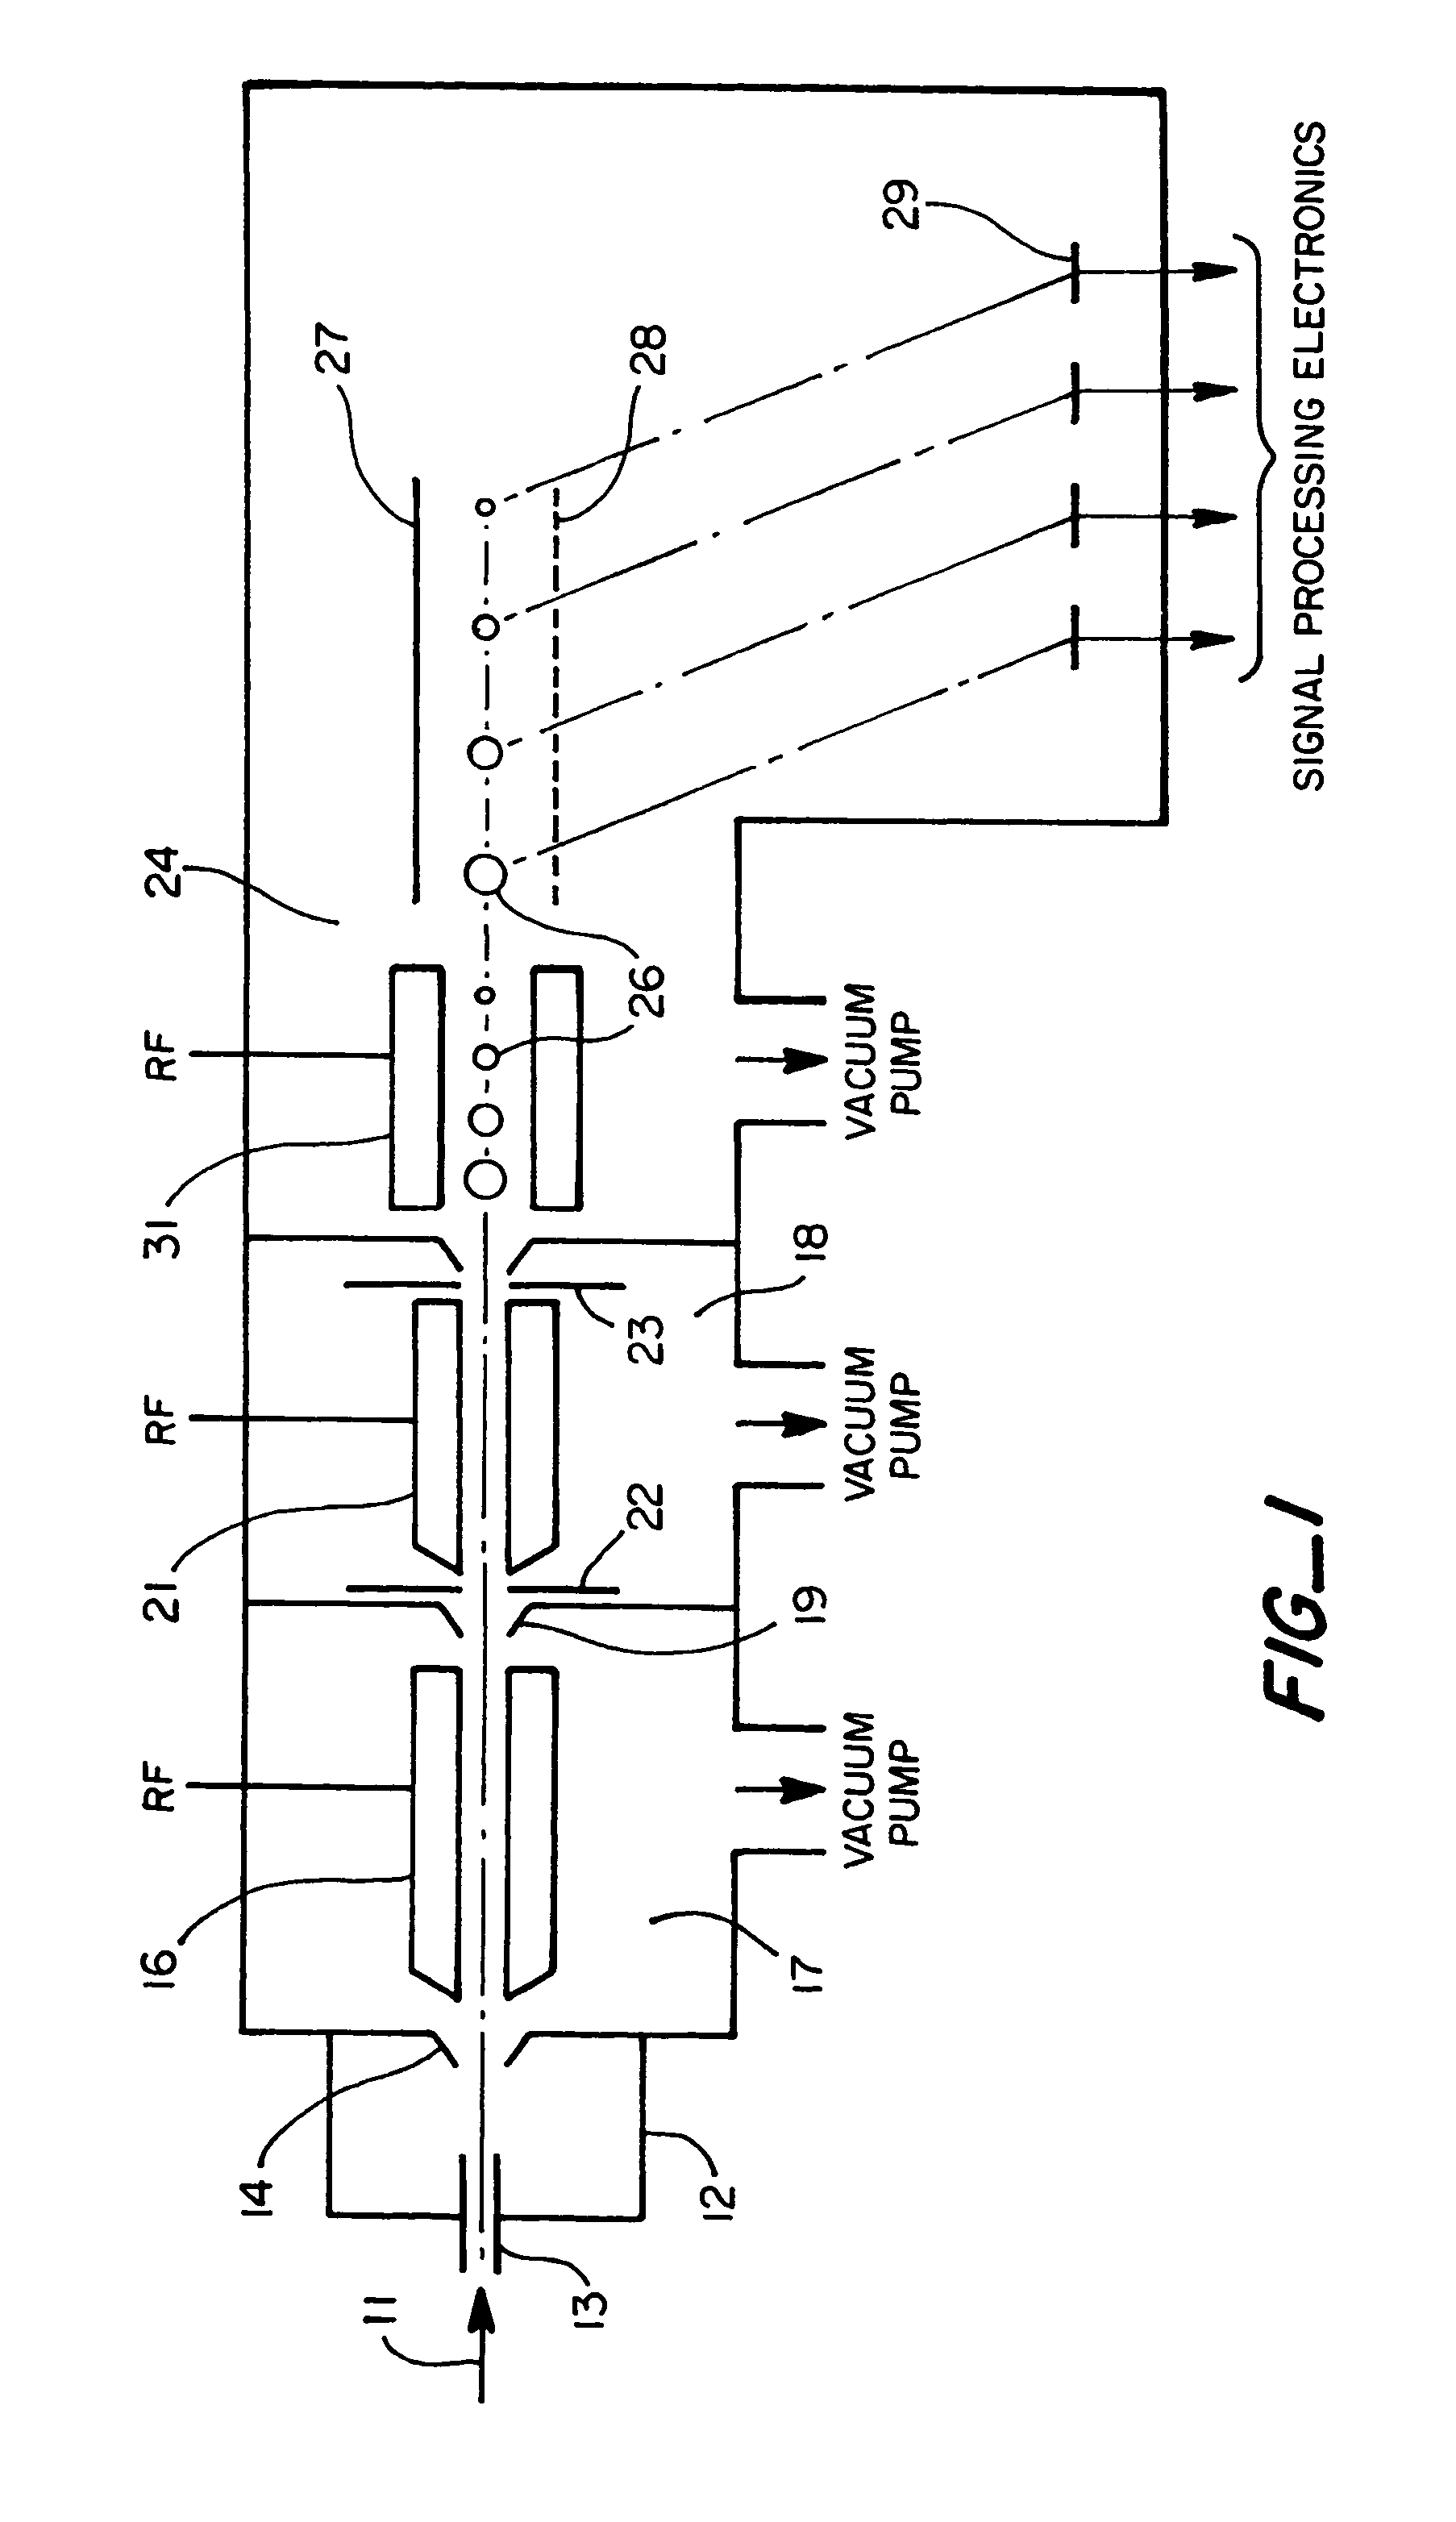 Distance of flight spectrometer for MS and simultaneous scanless MS/MS